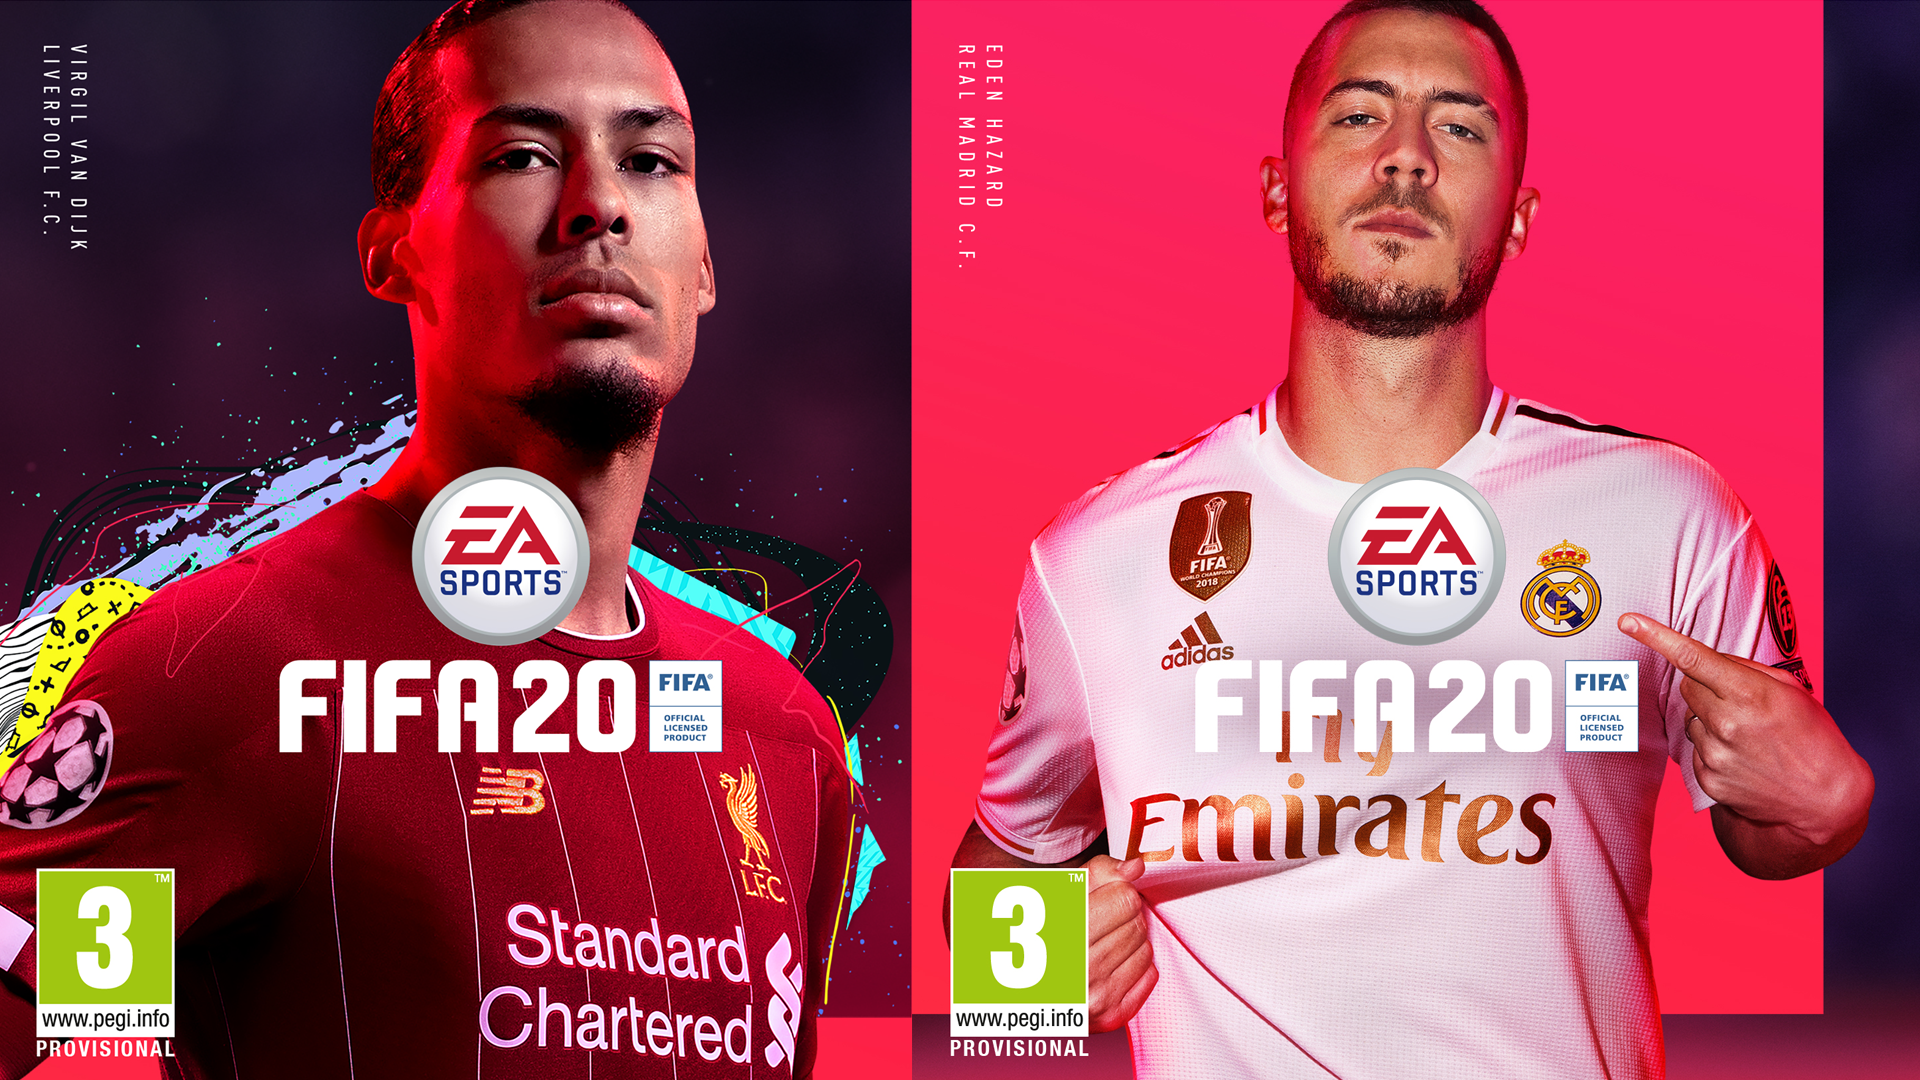 metodologi Vurdering Udpakning FIFA 20: Release dates, price, new features & pre-order news | Goal.com